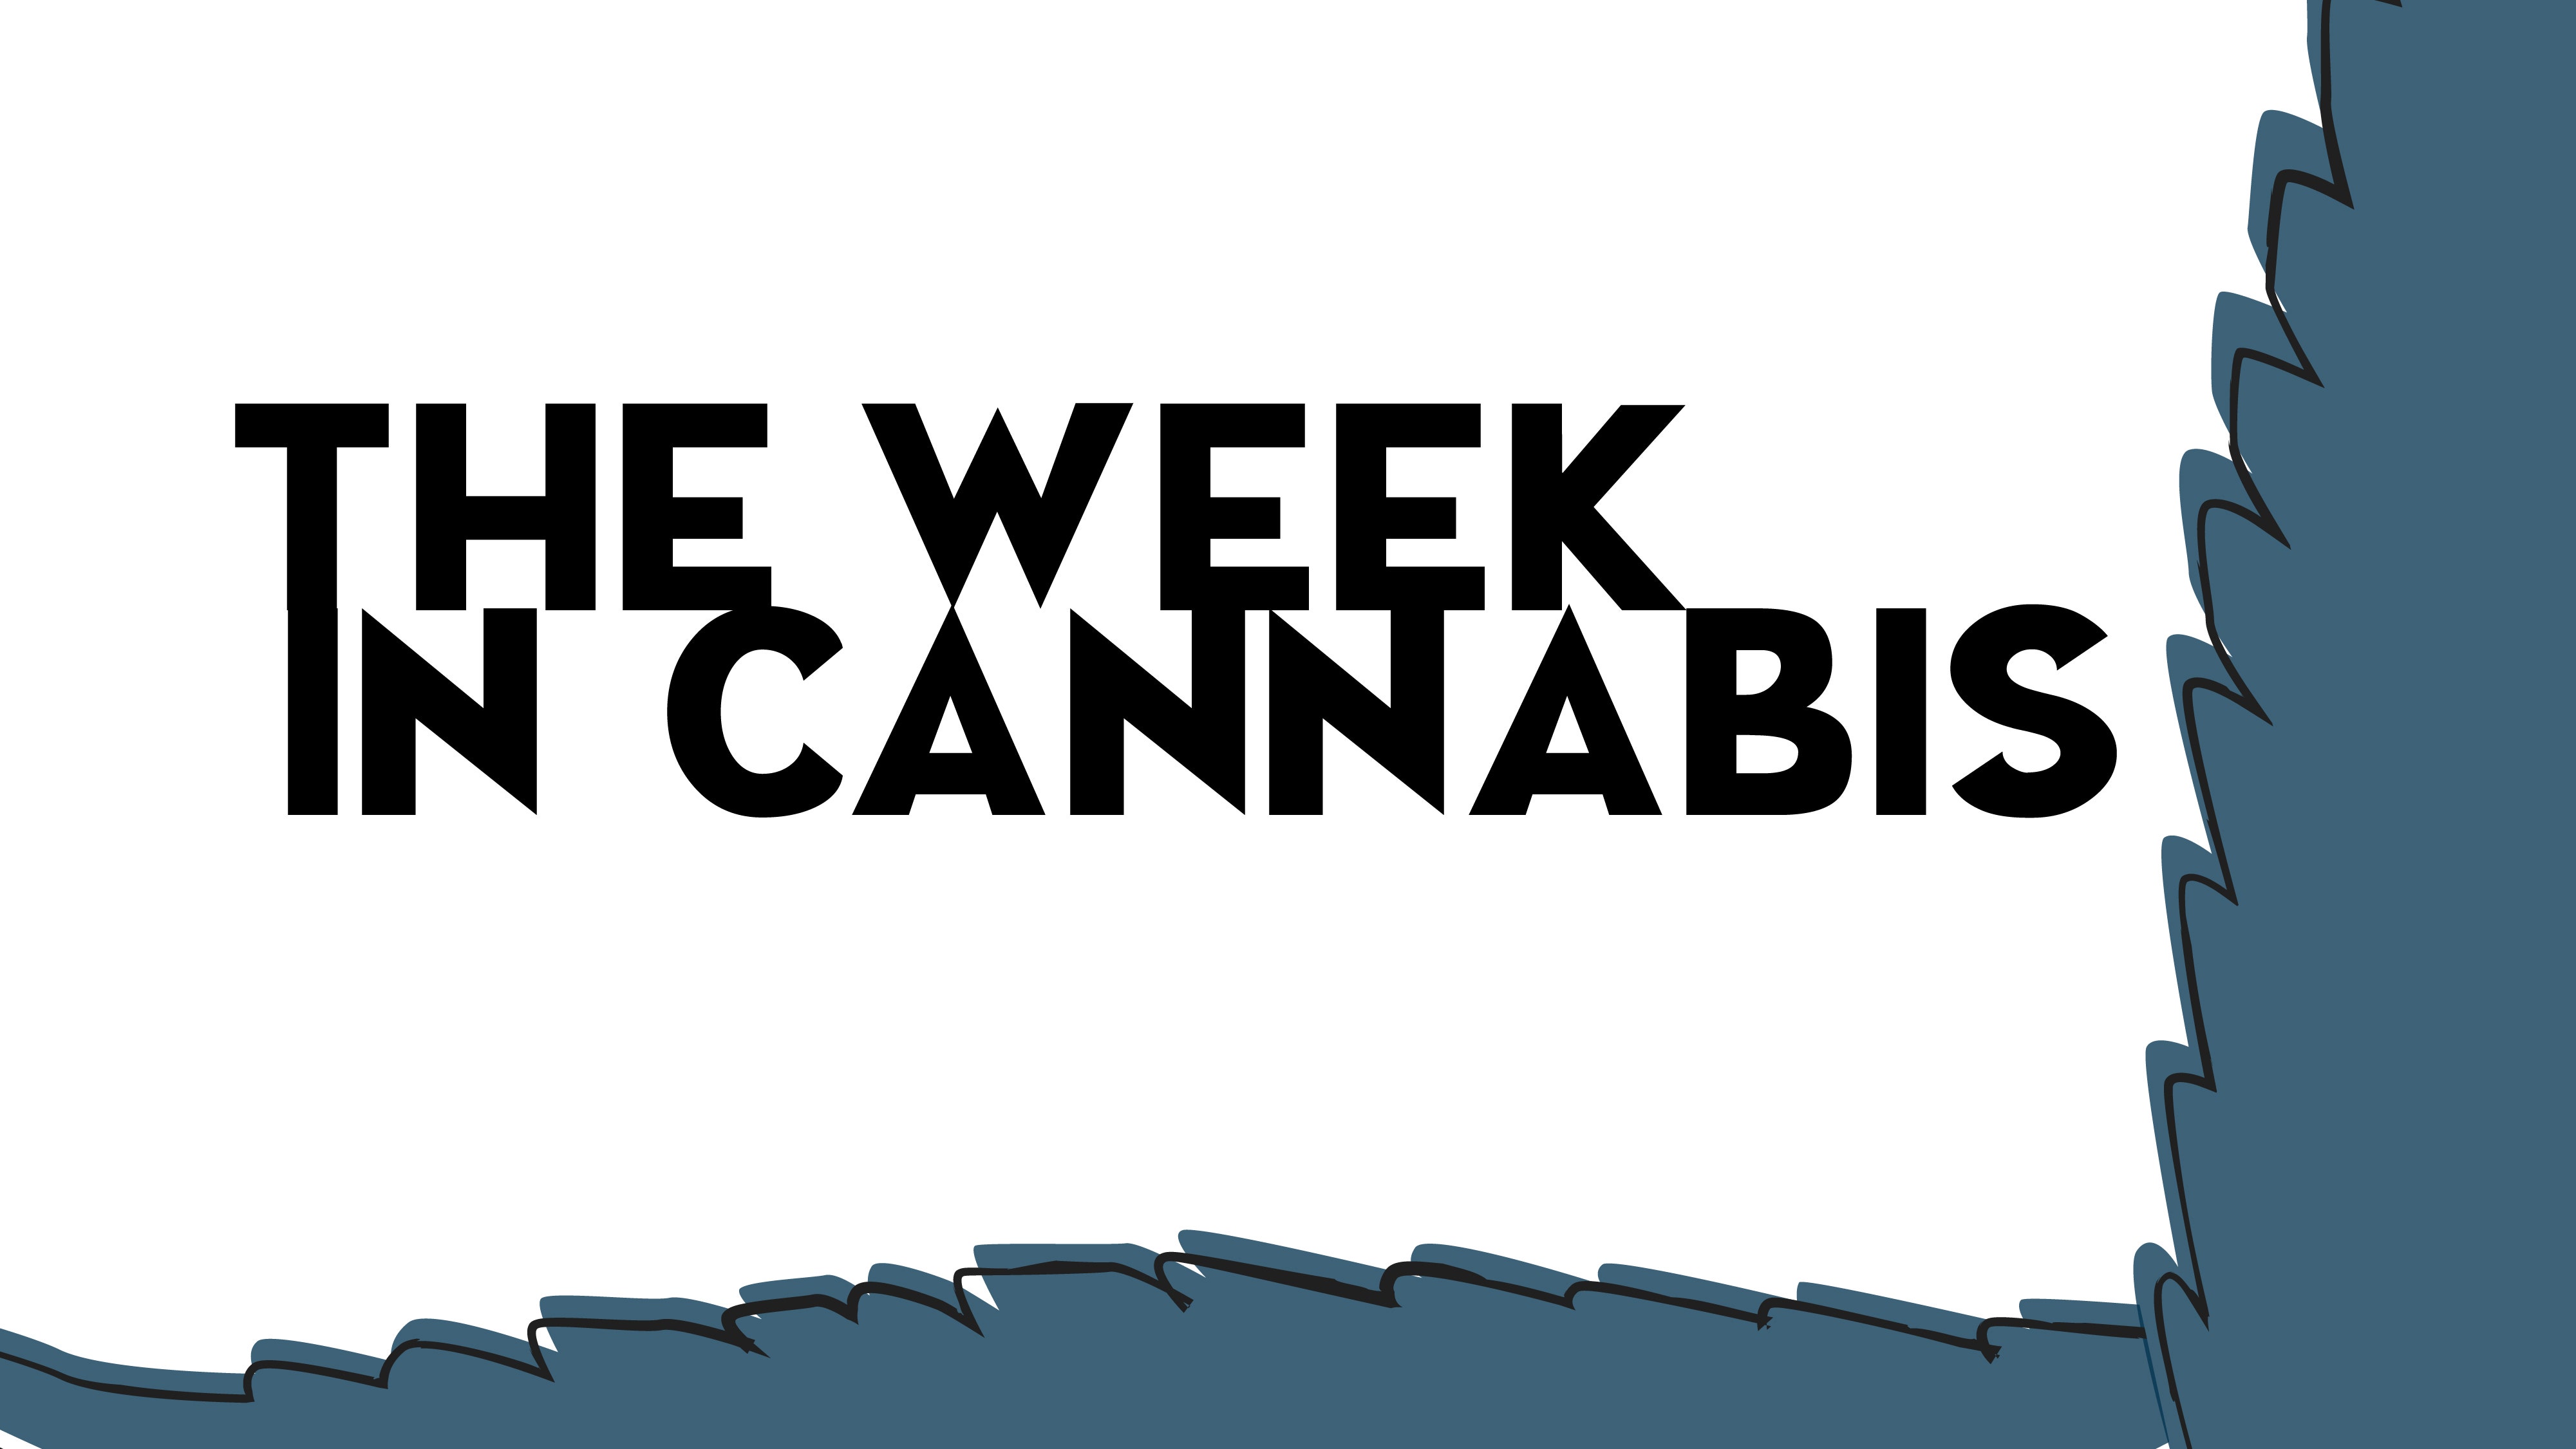 The Week In Cannabis: The New Tilray, Jazz-GW Pharma, Earnings, M&A, And More